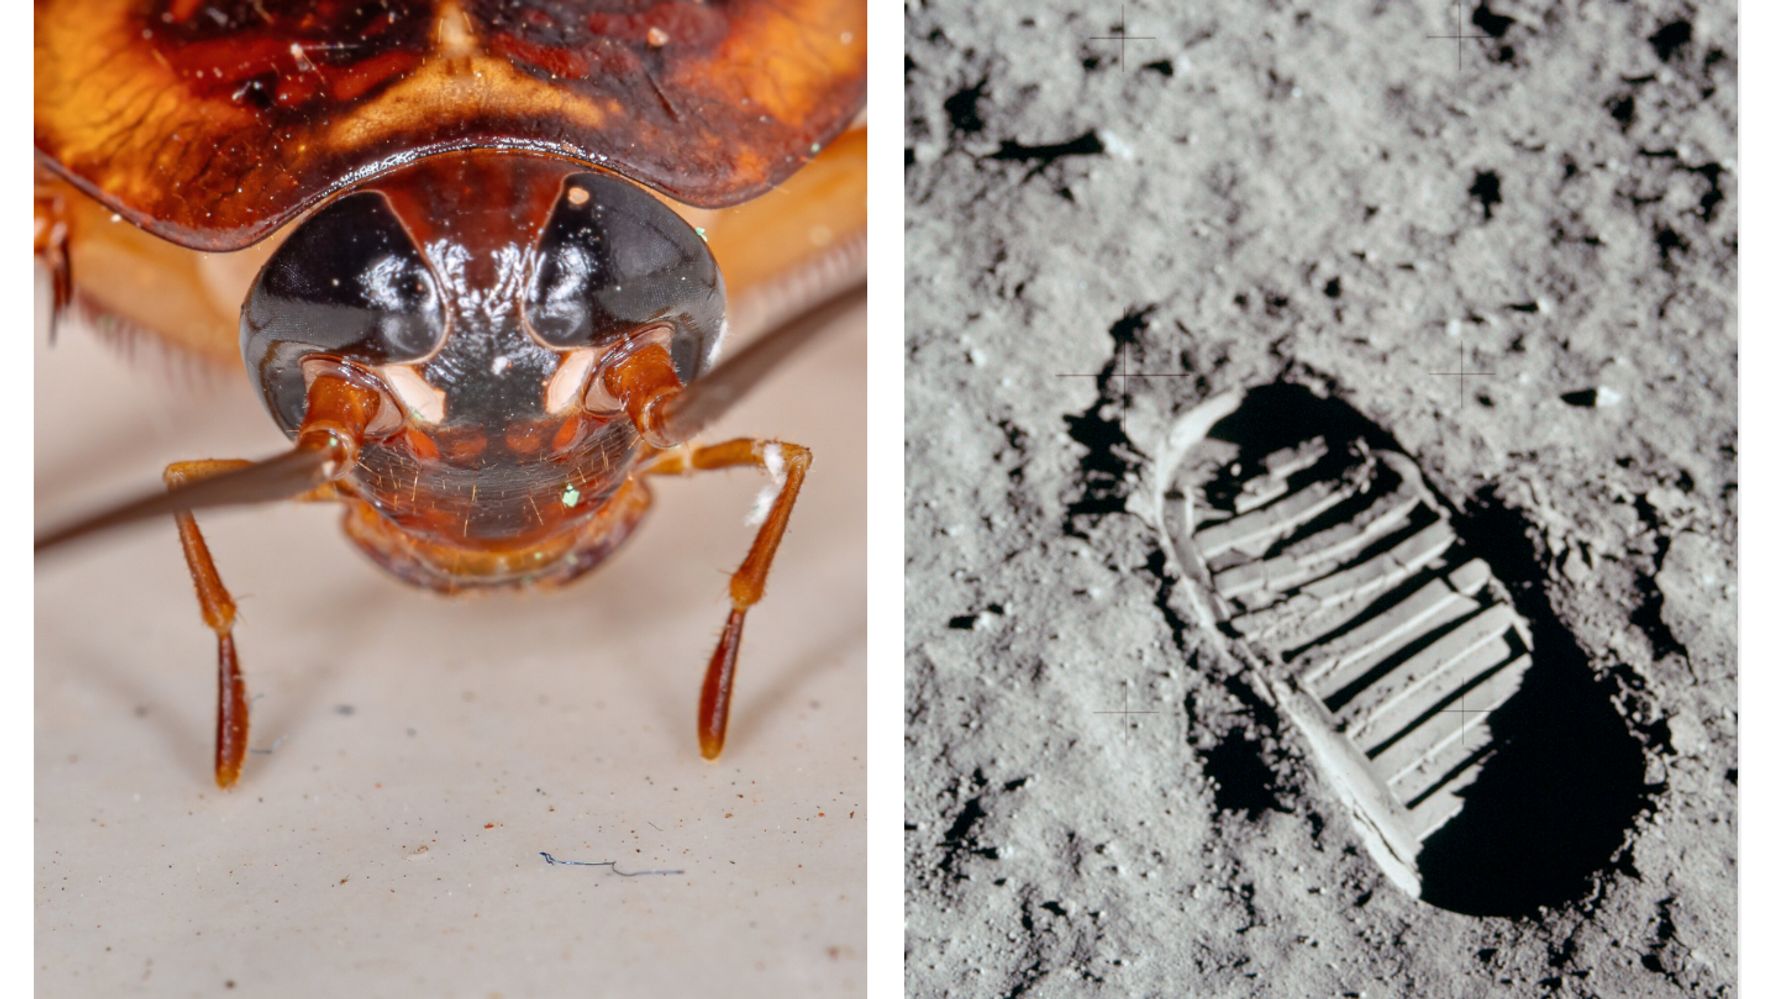 NASA Wants Its Moon Dust And Cockroaches Back -- Now!